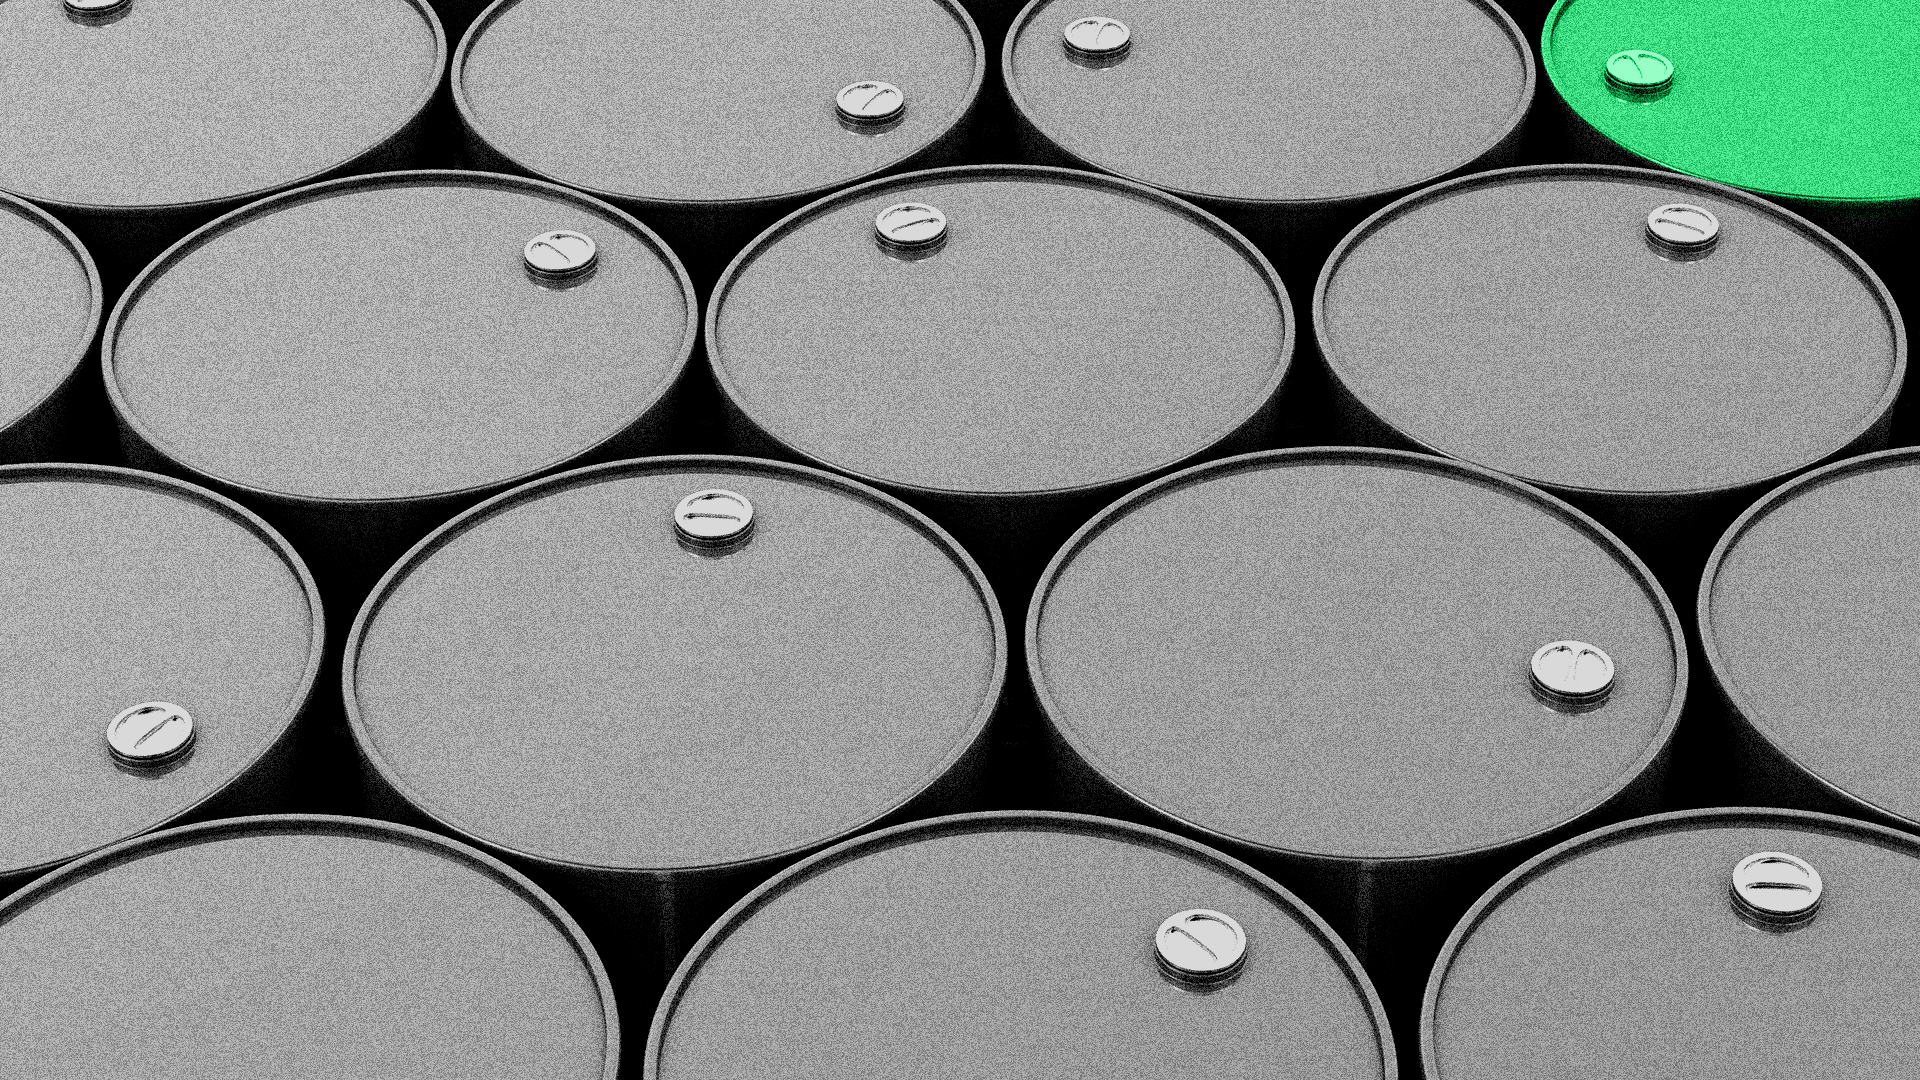 Illustration of a collection of oil barrels, with one green one.